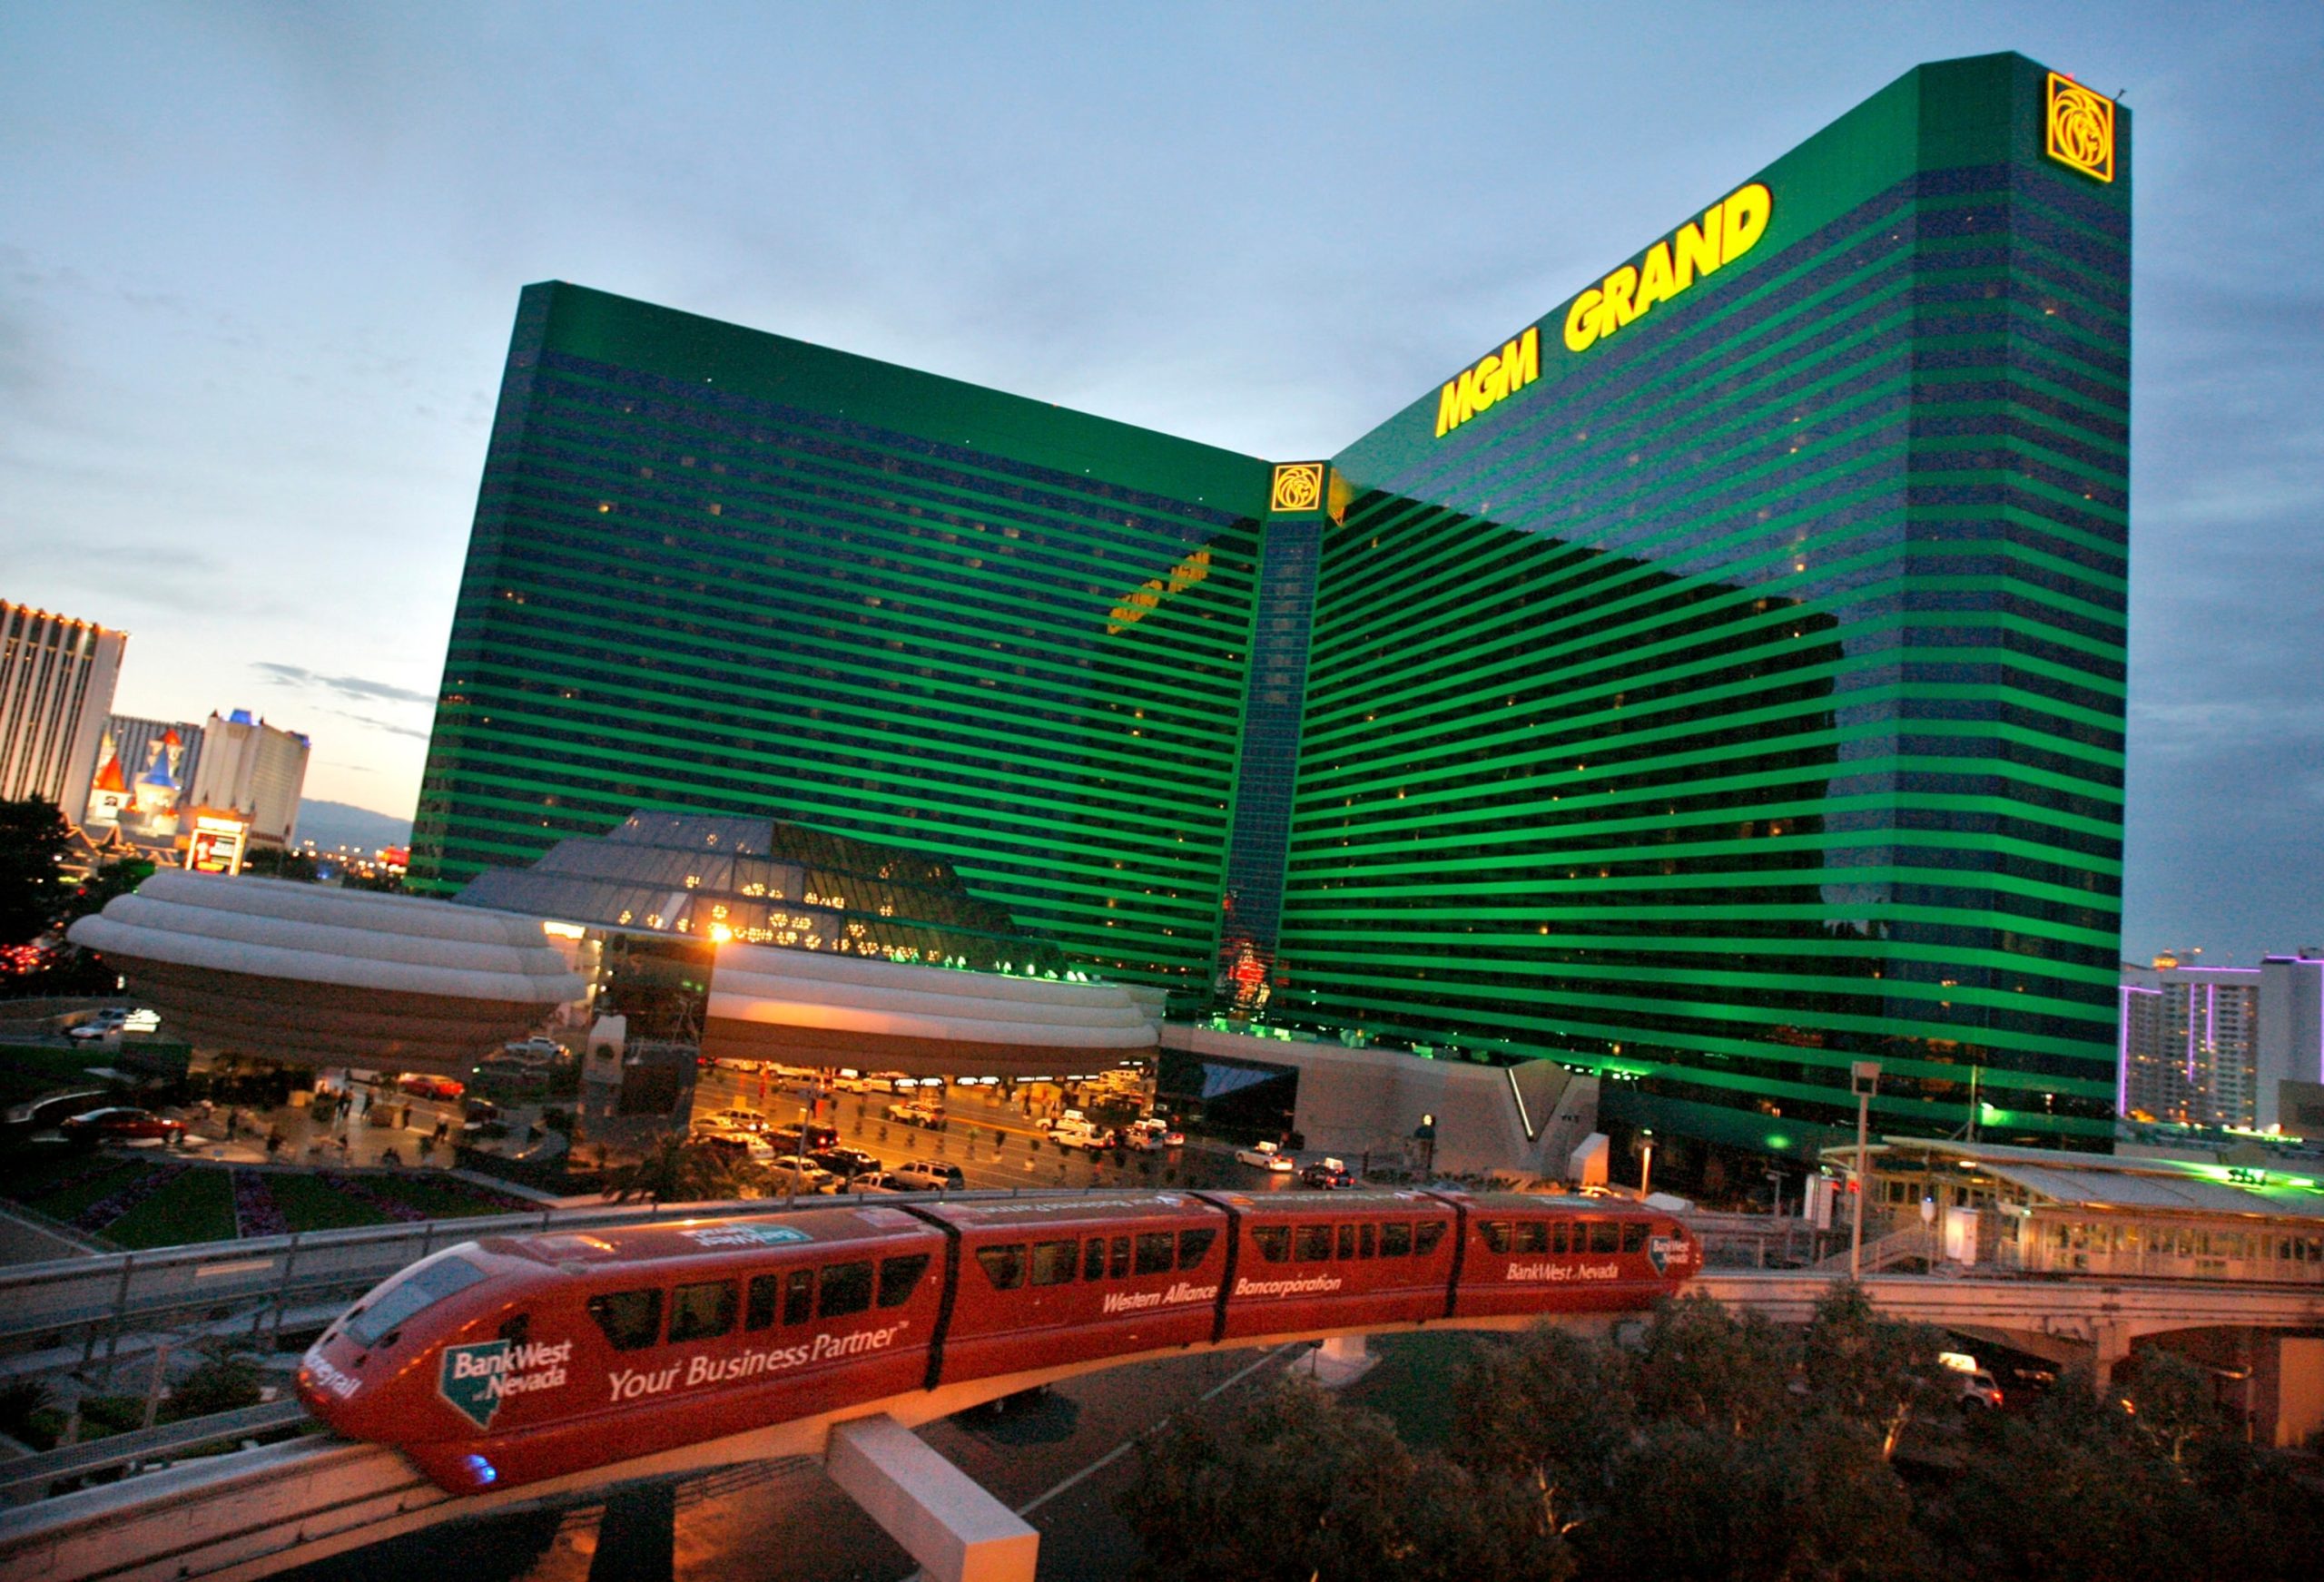 MGM Hotels in Las Vegas Experience IT System Shutdown Due to Cyberattack